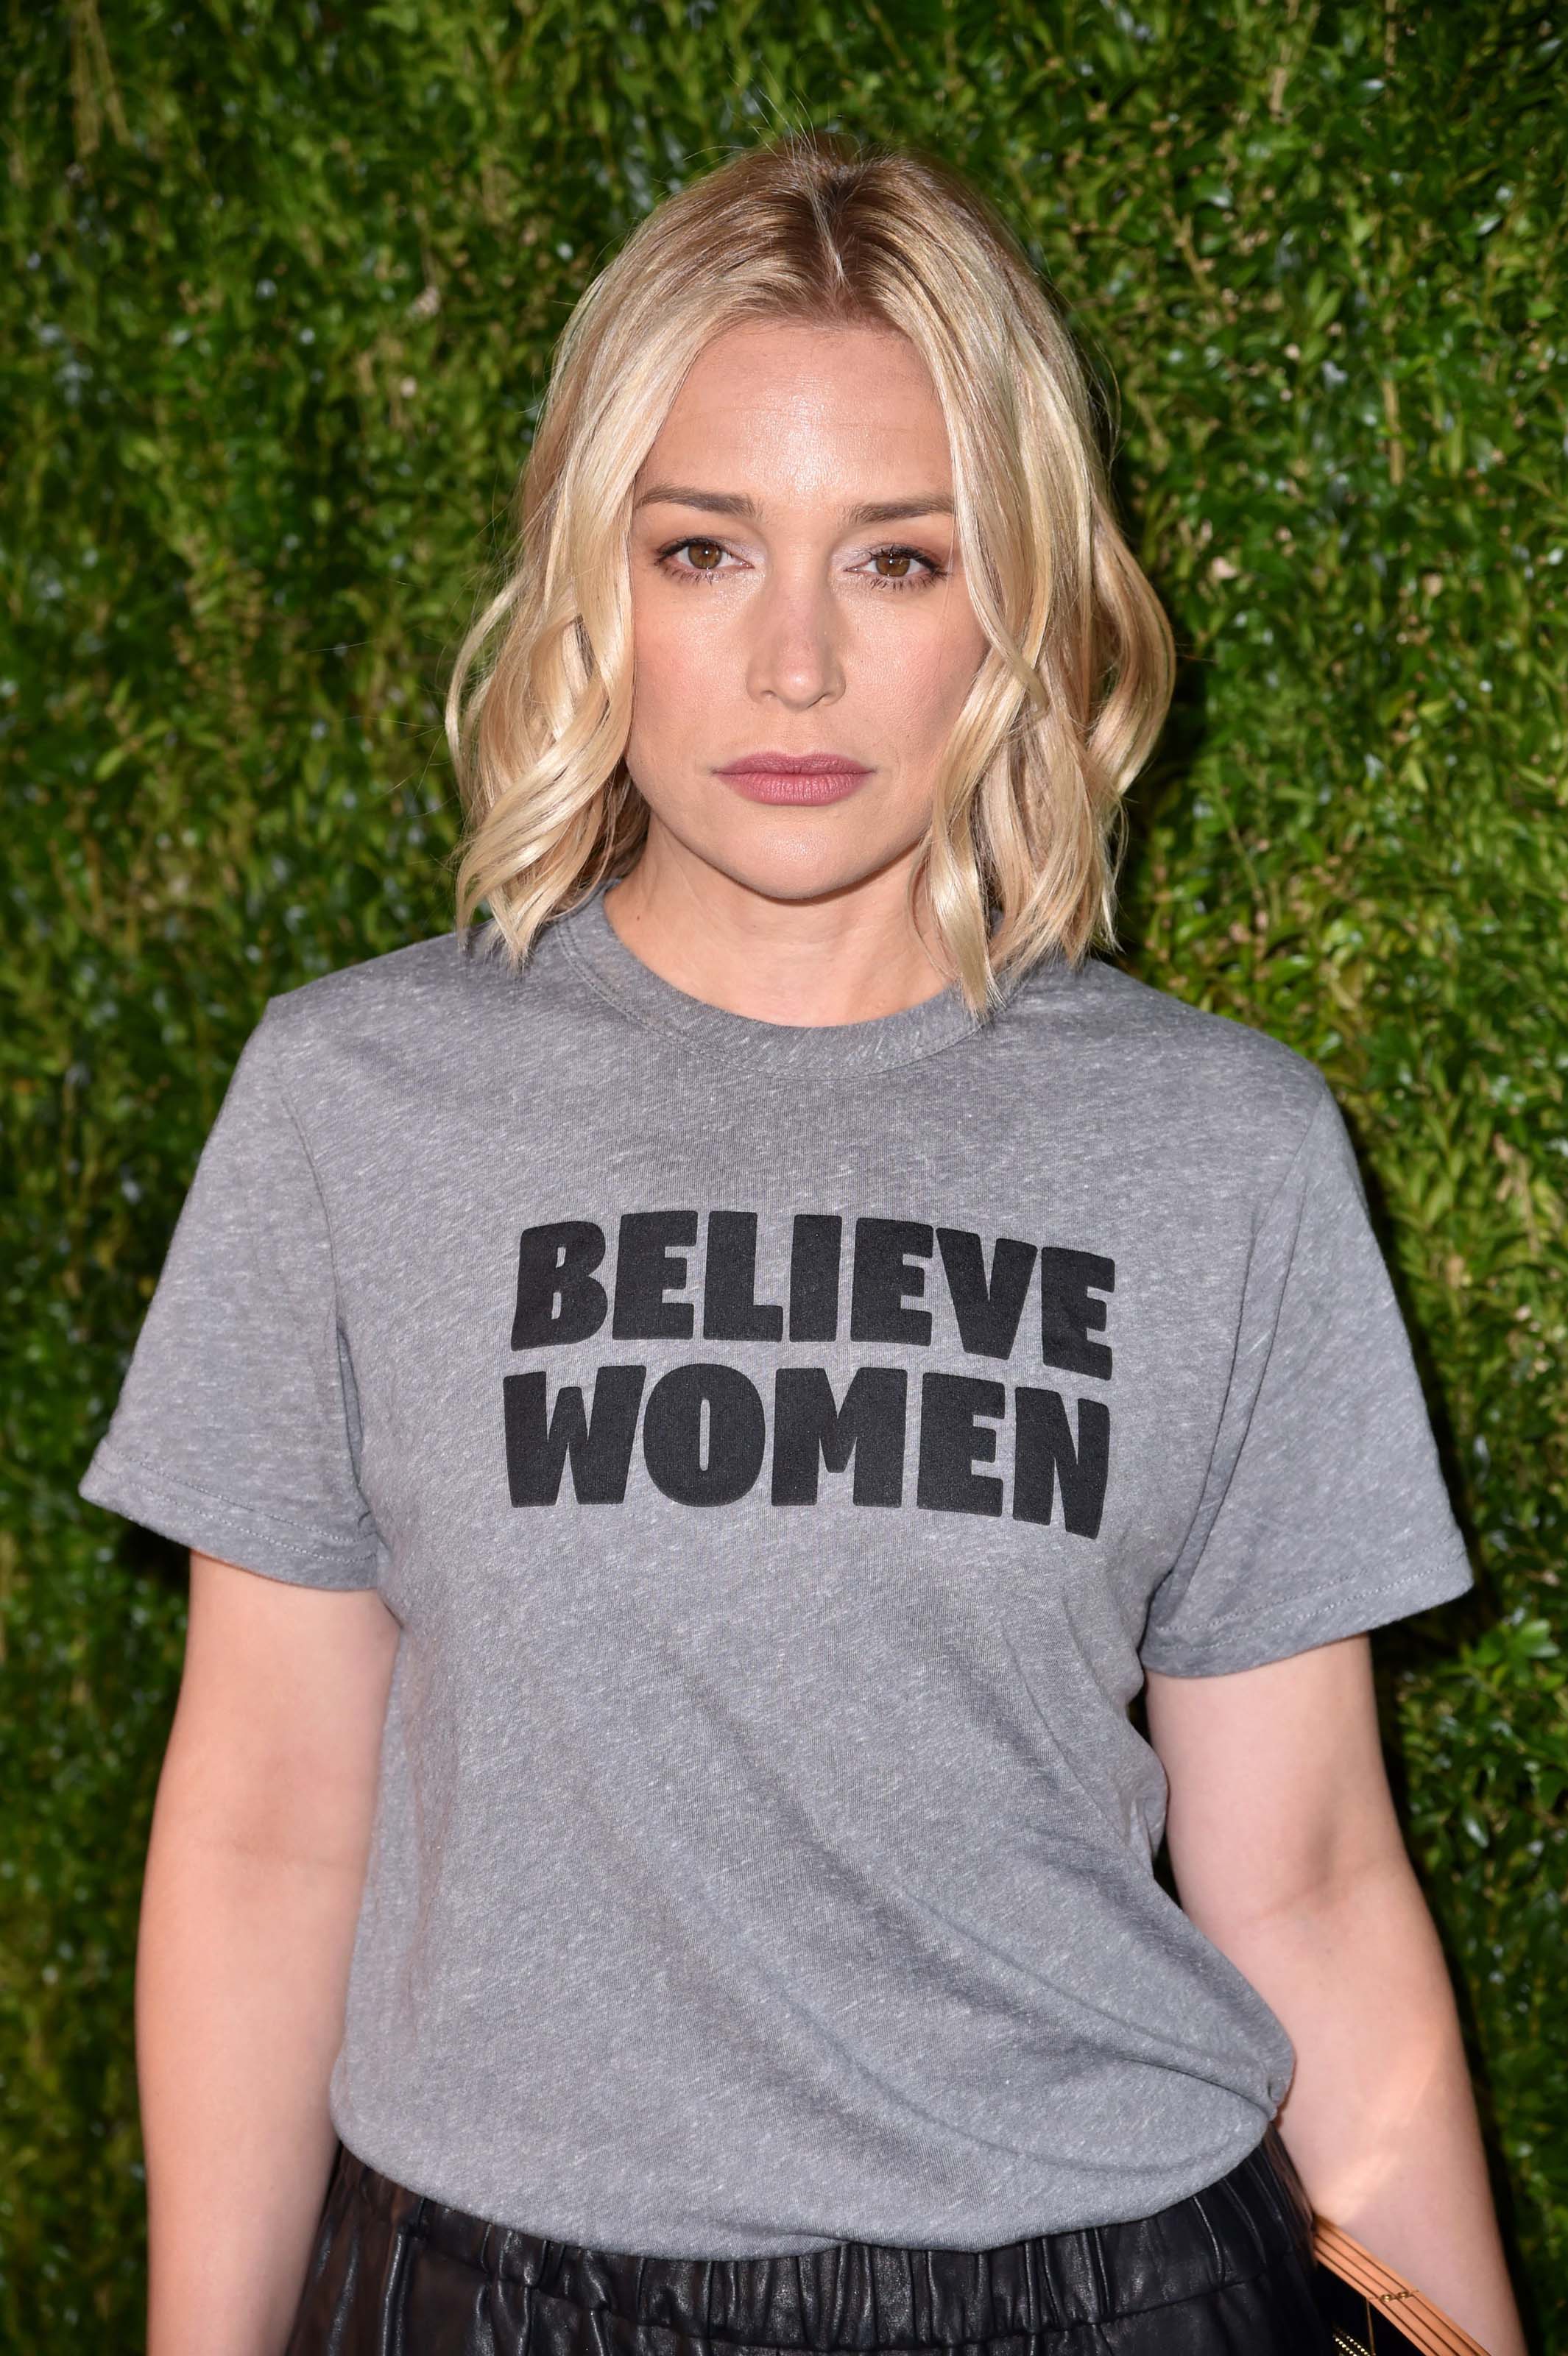 Piper Perabo attends Through Her Lens The Tribeca